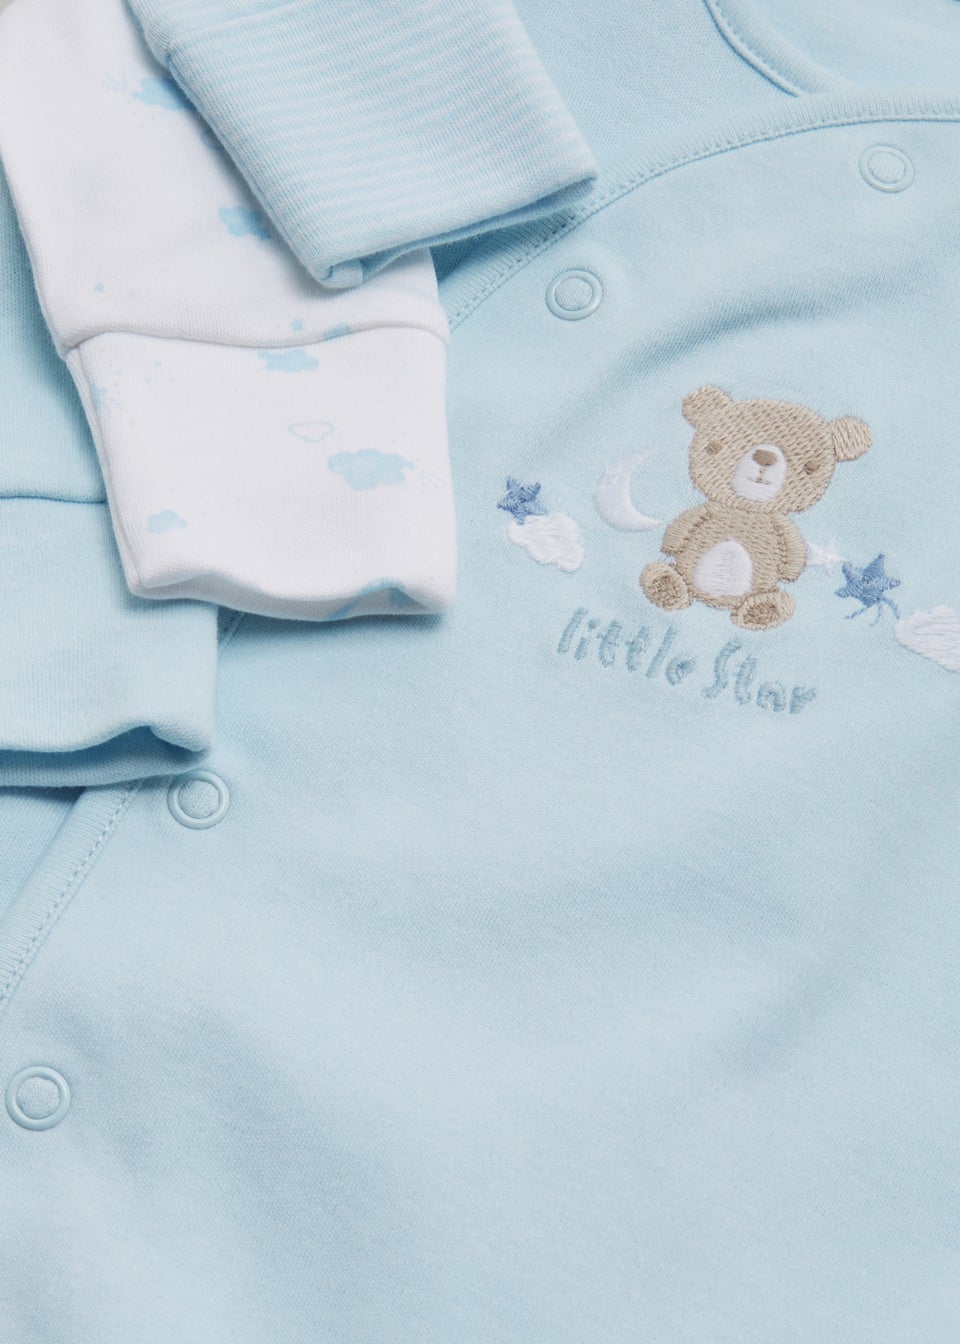 Baby 3 Pack Blue Layette Sleepsuit (Tiny Baby-18mths)